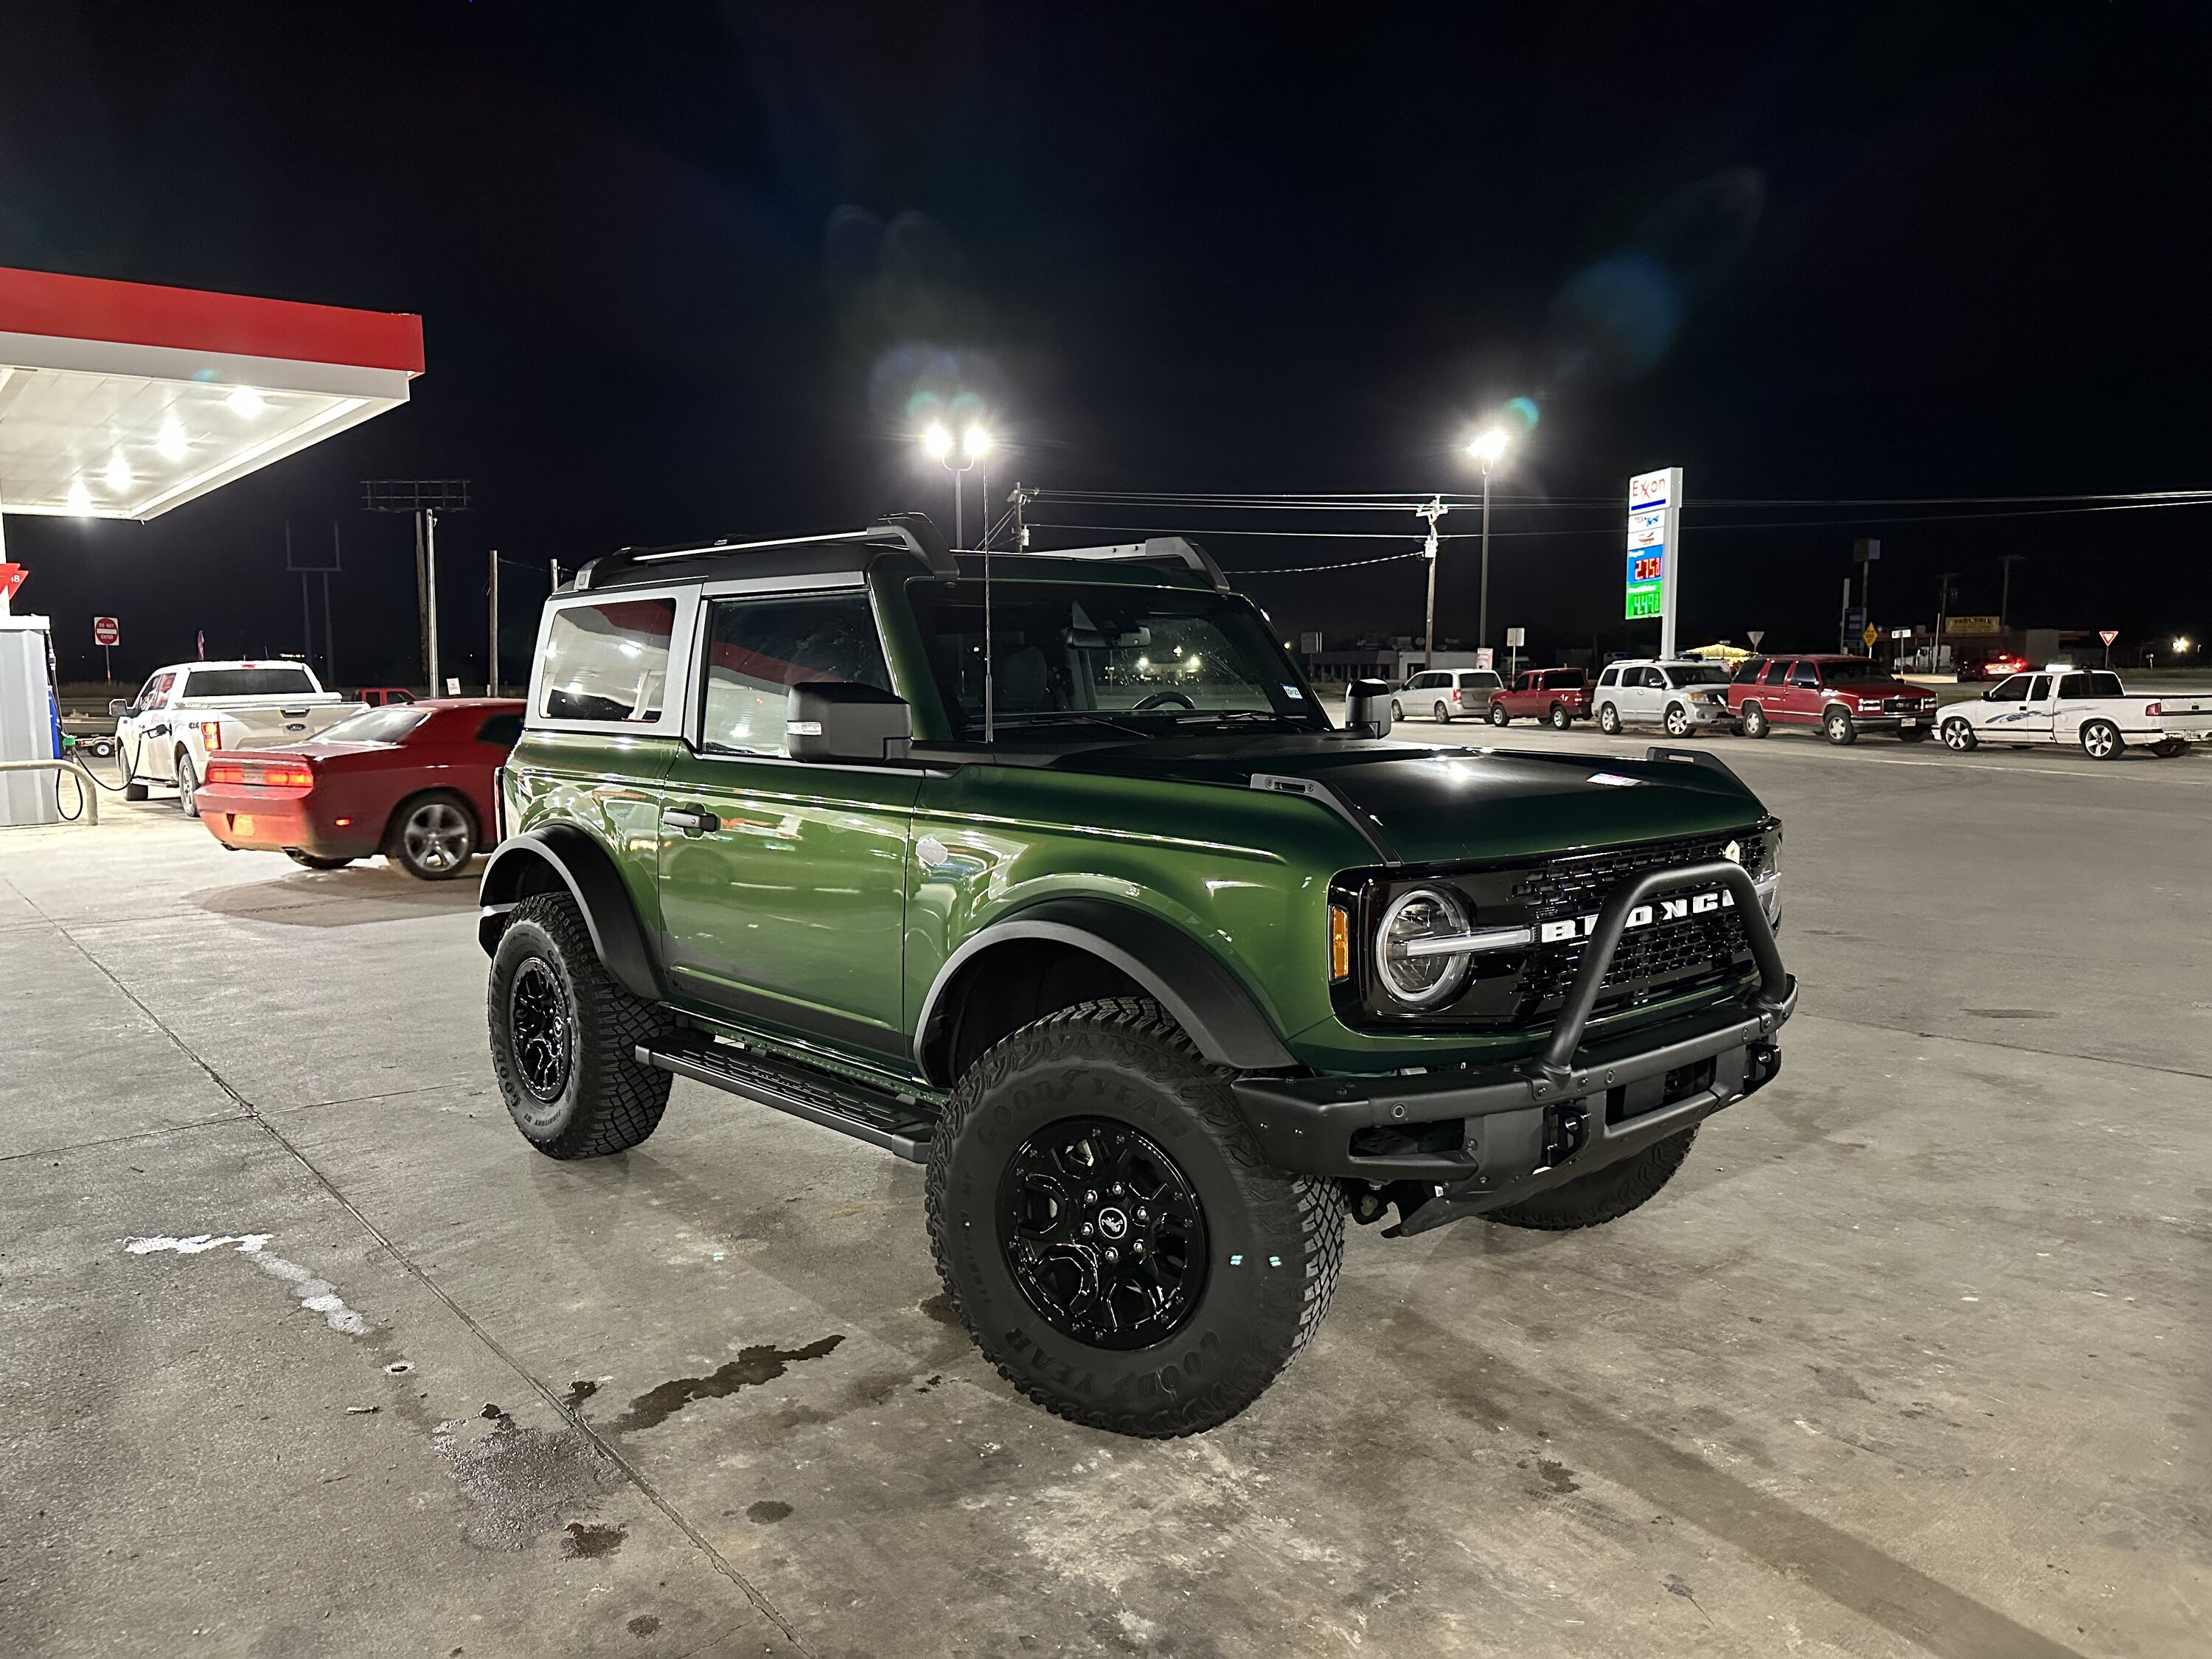 Ford Bronco 2 Door Broncos - What’s on your roof racks? [Photos Thread] IMG_0292